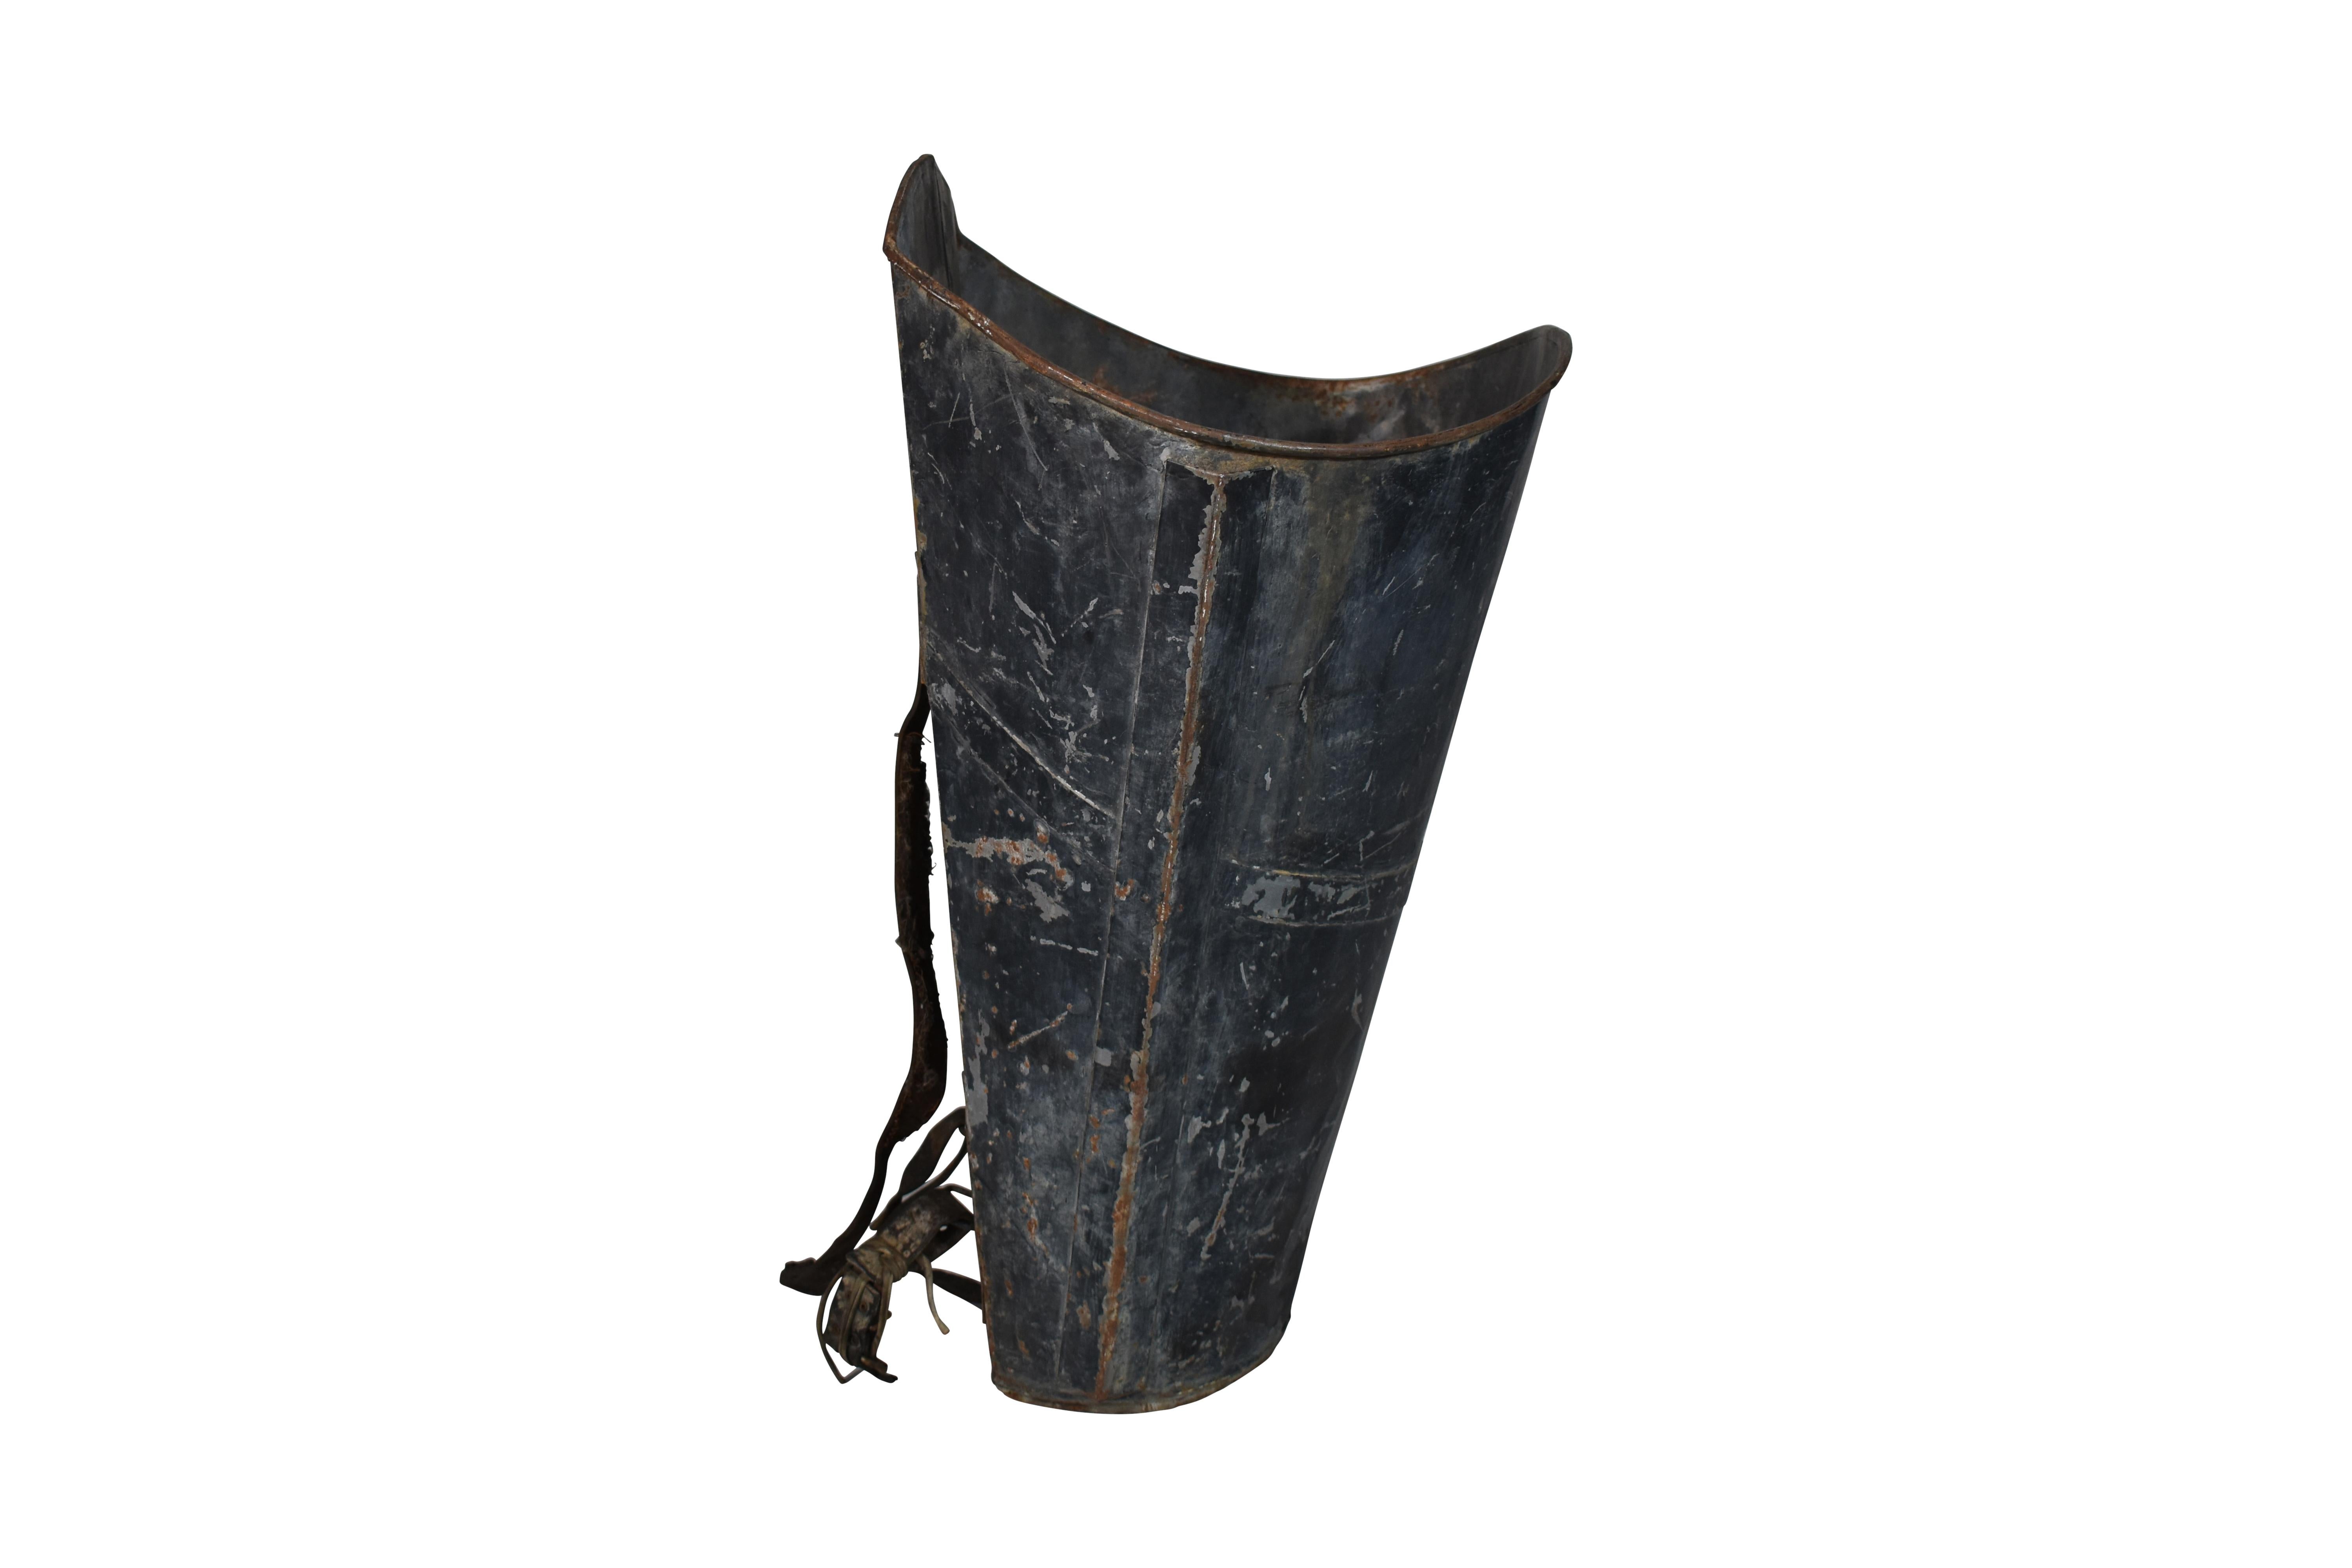 The tole vineyard basket with leather straps is used for collecting vendages in the field. A decorative accessory for kitchen or garden to add European flair to your home.